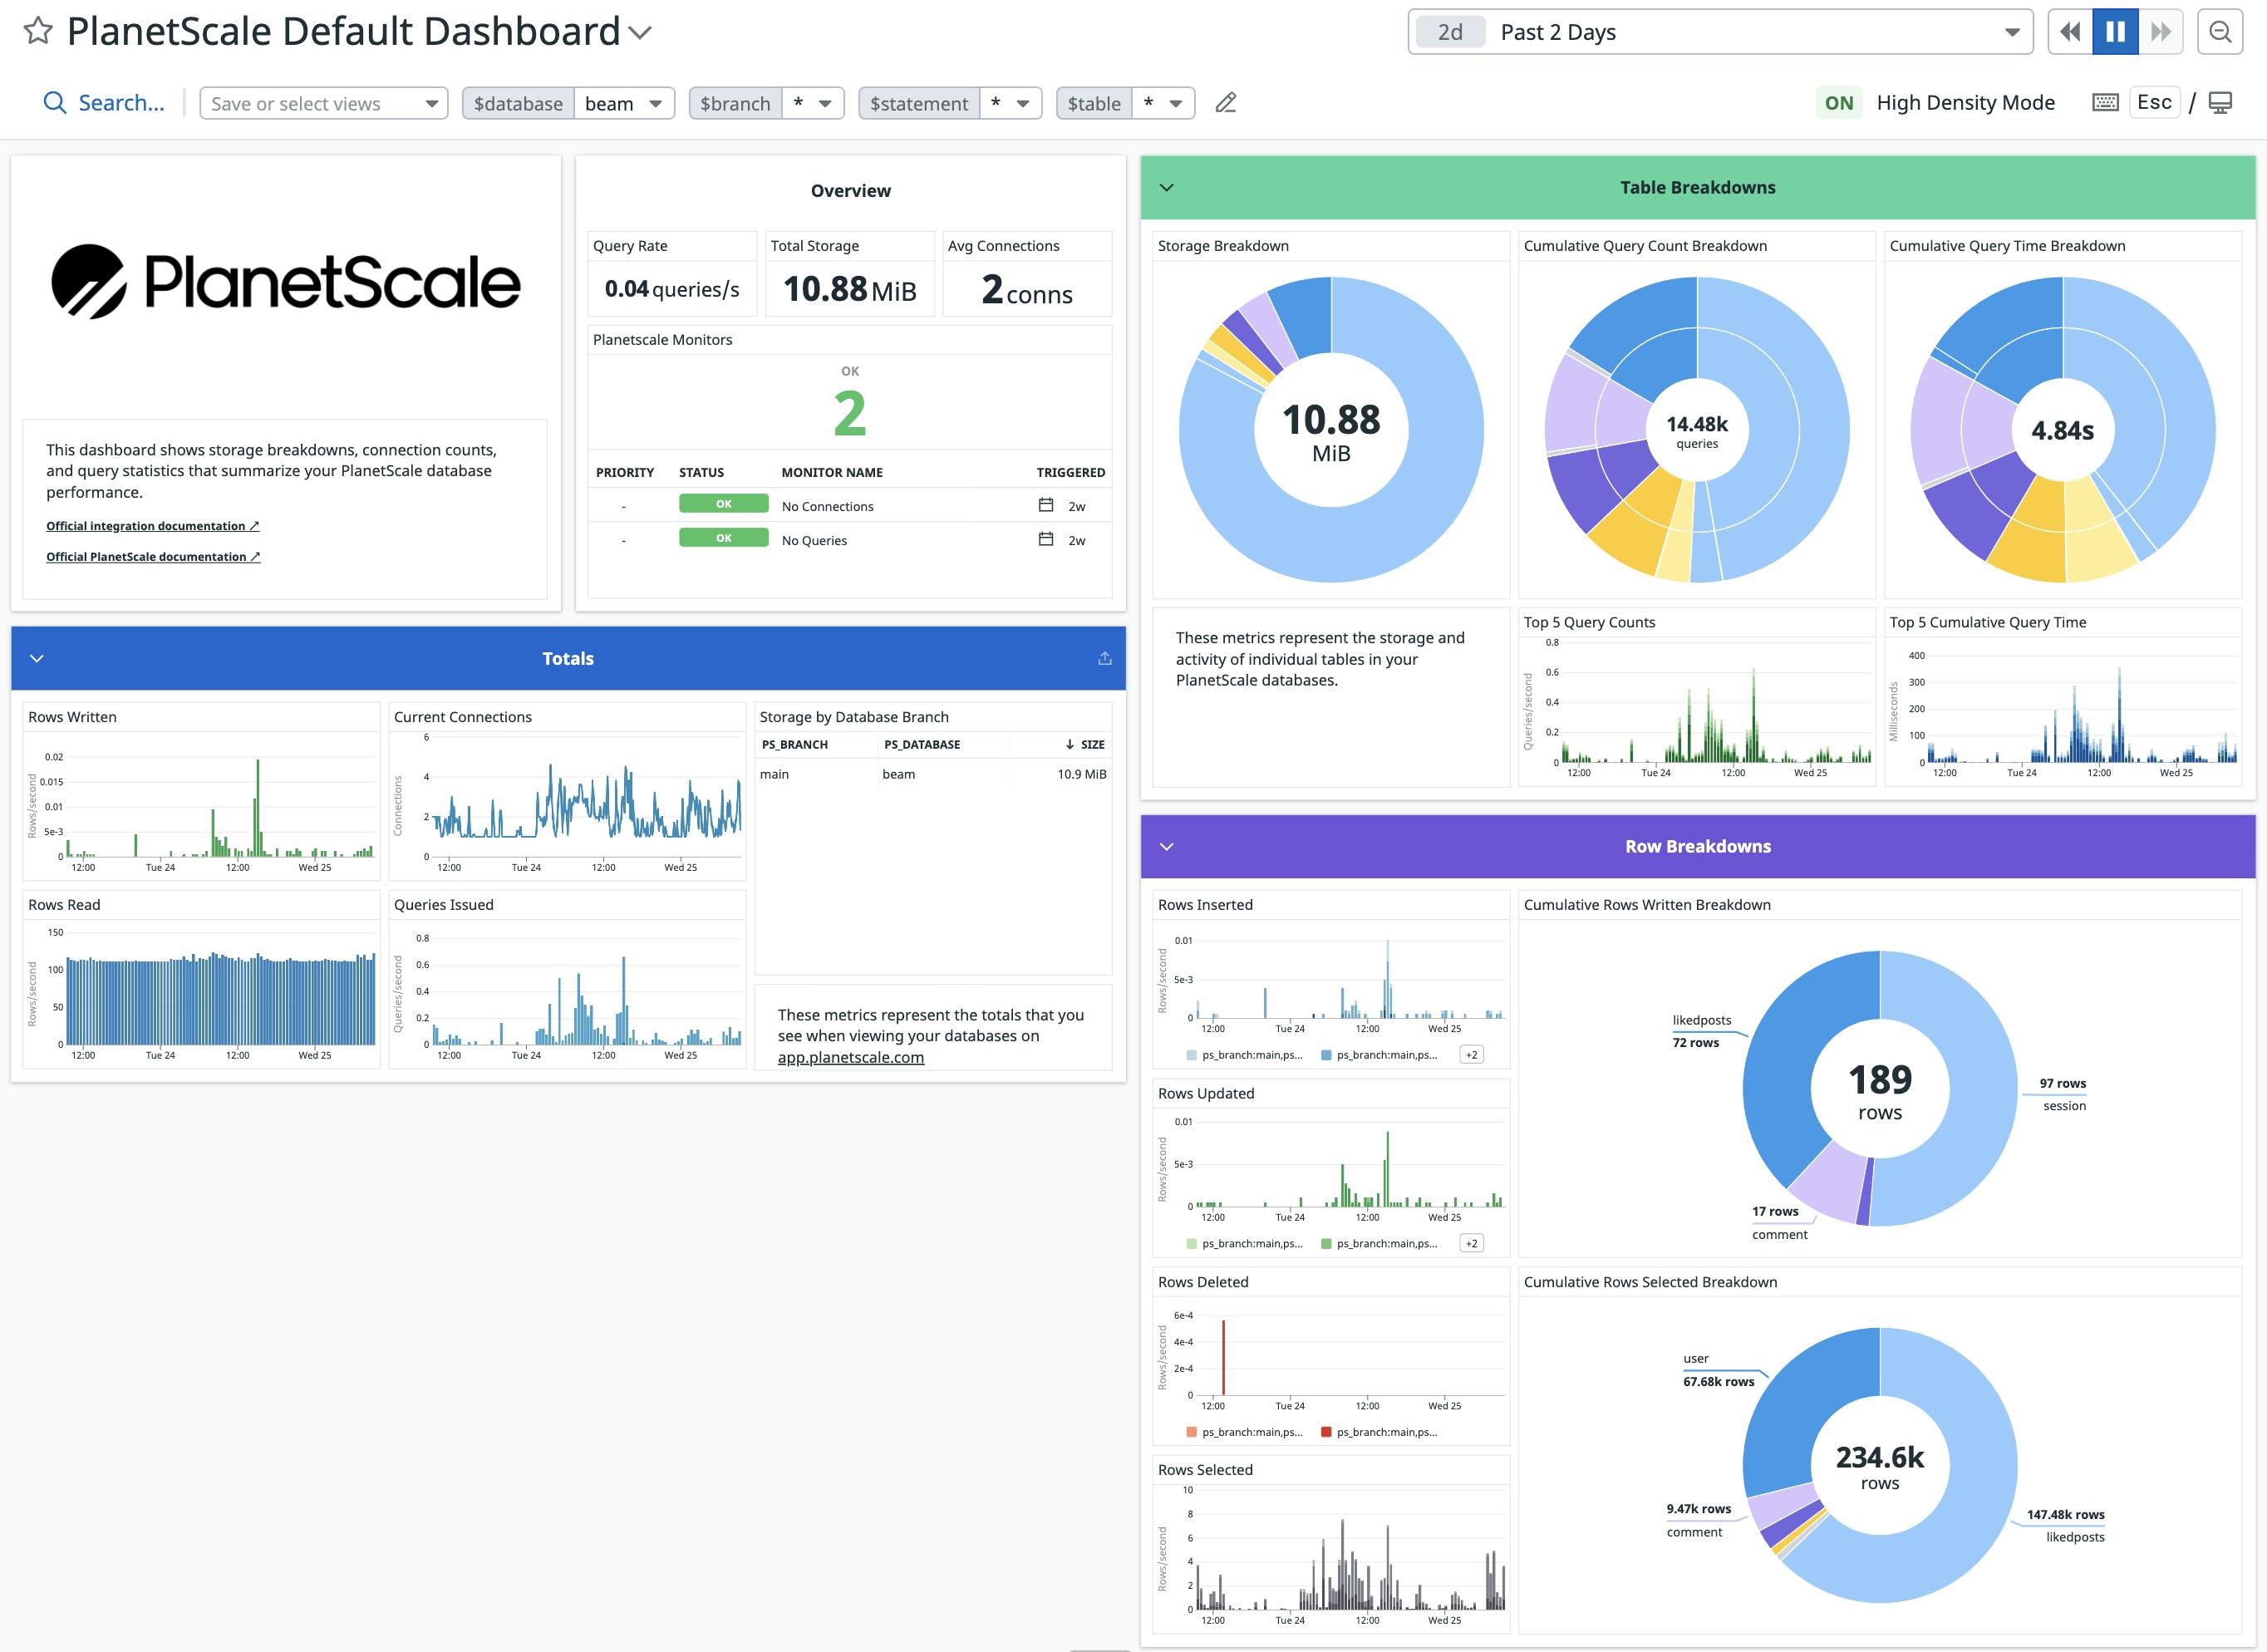 Image of the PlanetScale Default Dashboard in Datadog showing overview metrics, table and row breakdowns, info about connections, and query rates